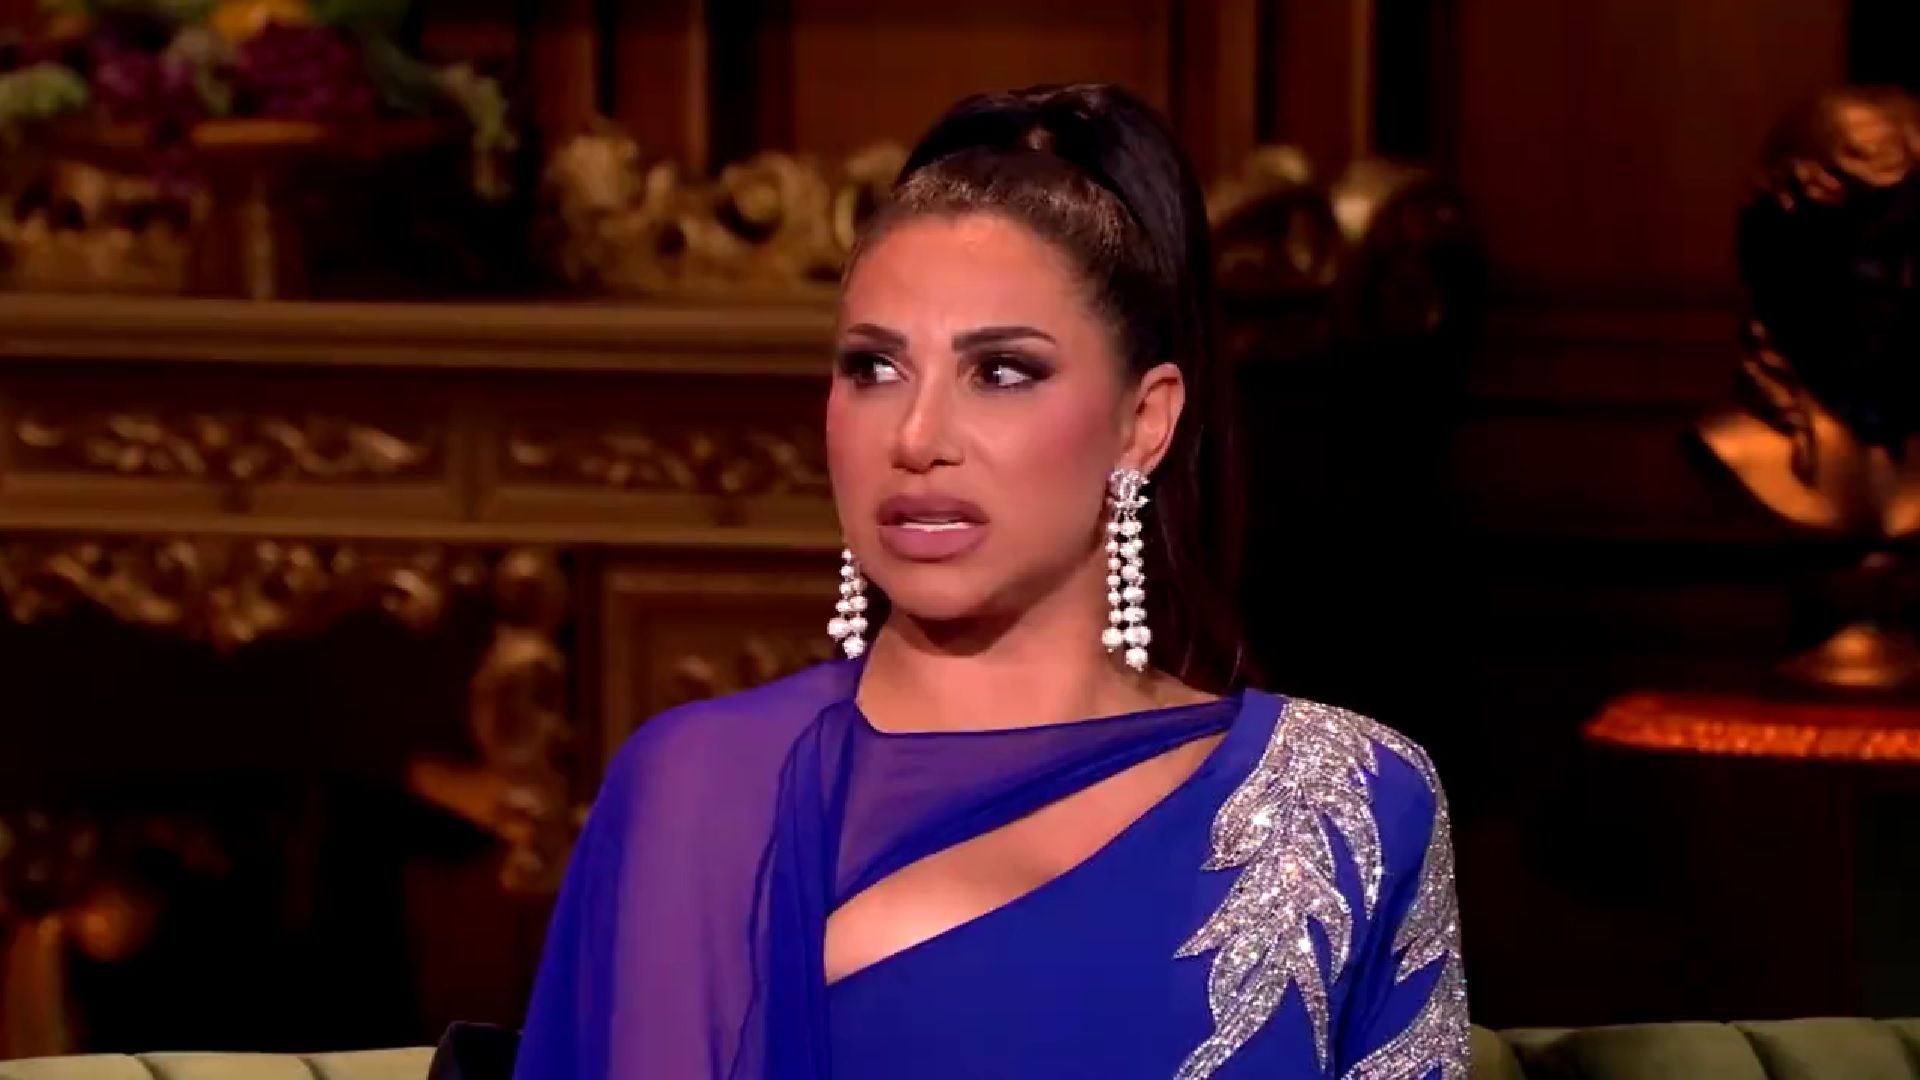 'RHONJ' Season 13 Clip Previews More Heated Drama From the Reunion